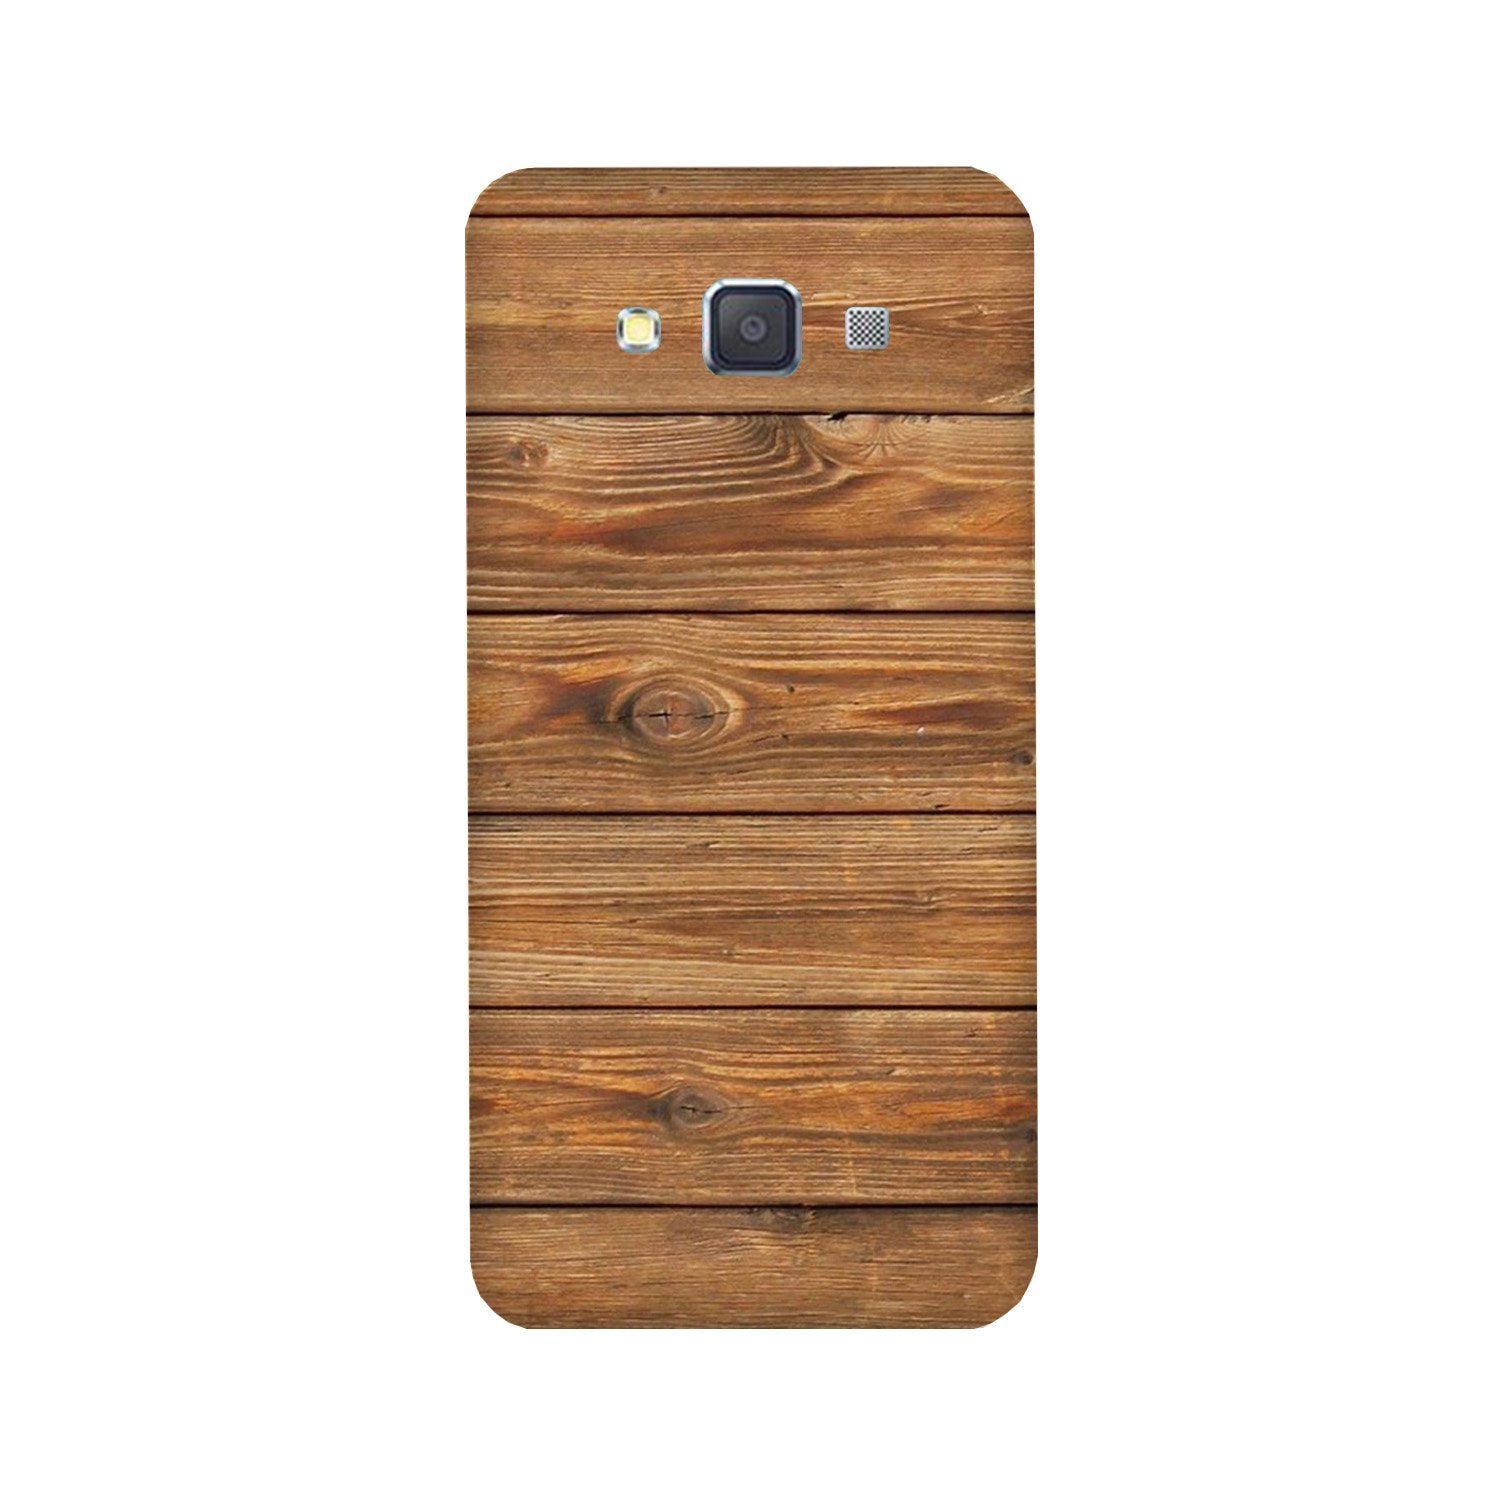 Wooden Look Case for Galaxy Grand Max(Design - 113)